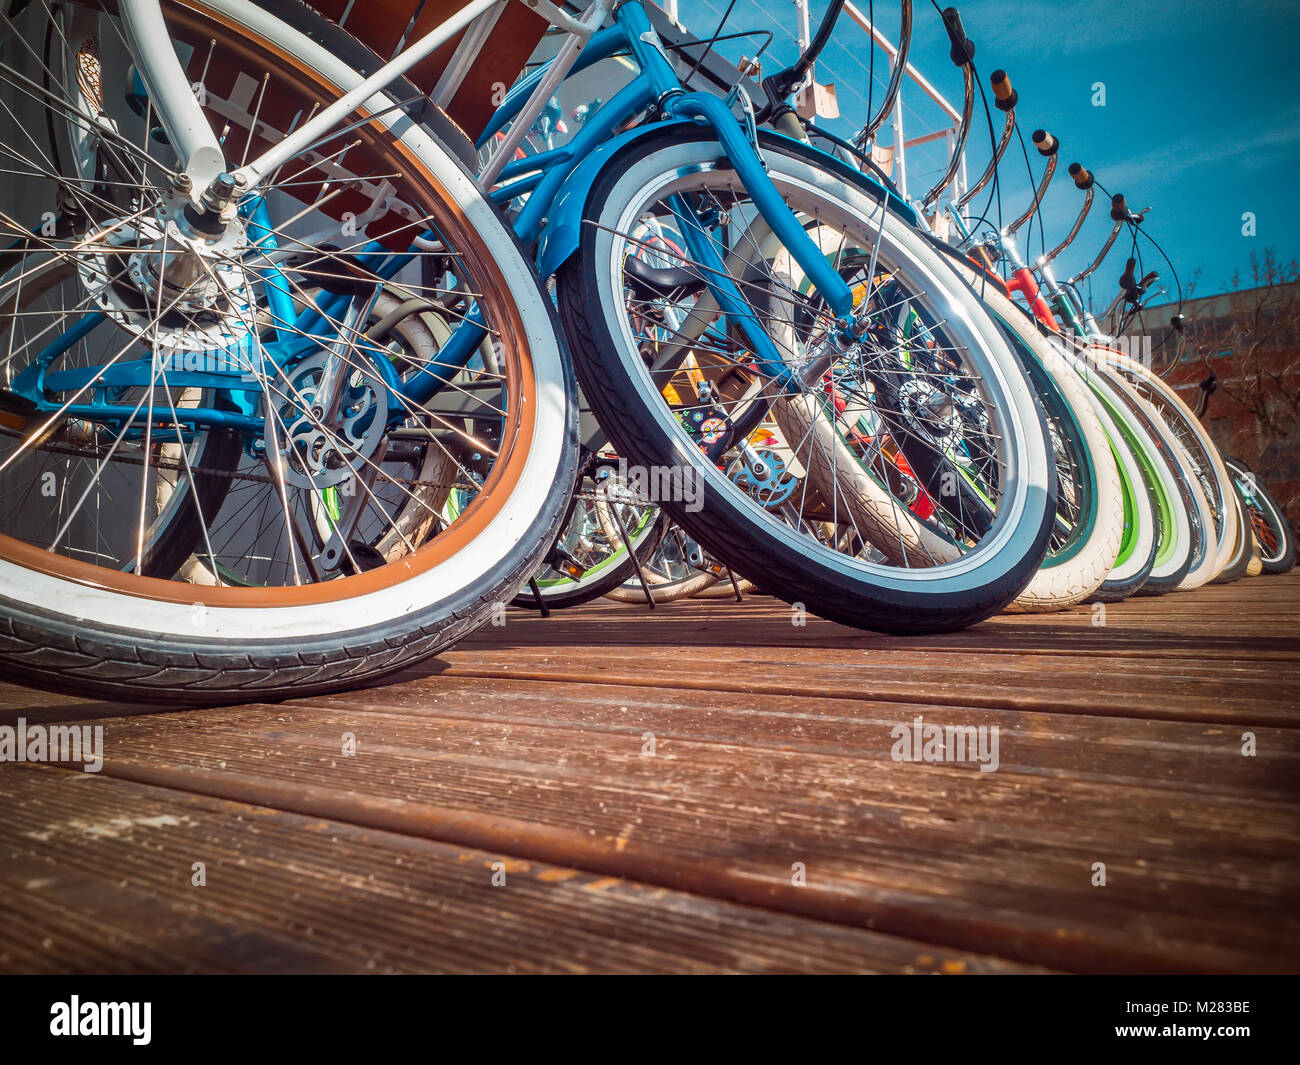 Many bikes in a row on the street. Bicycle parking. Colored bicycles on the street Stock Photo